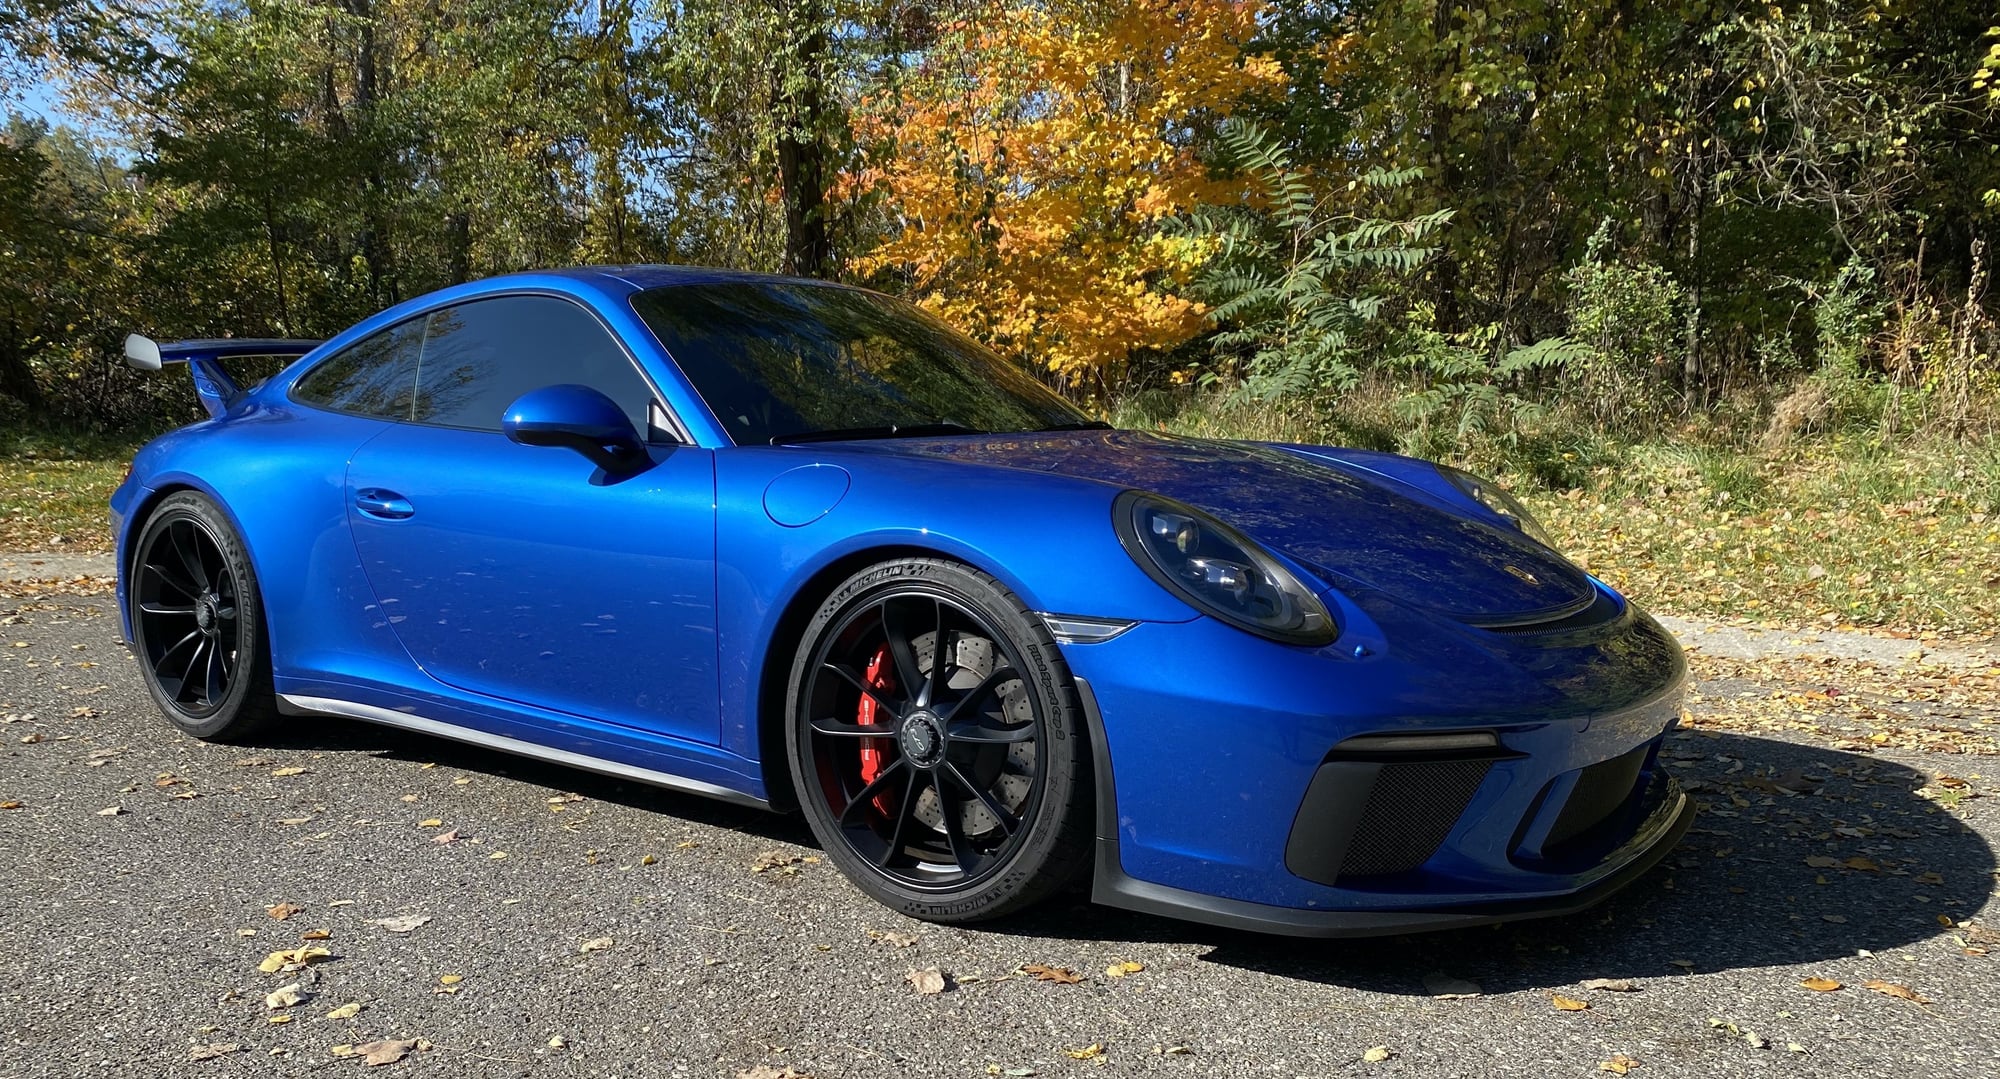 2018 Porsche GT3 - Saphirre Blue 991.2 GT3 (manual) - Used - VIN WP0AC2A93JS175837 - 13,800 Miles - 6 cyl - 2WD - Manual - Coupe - Blue - Oxford, MI 48371, United States